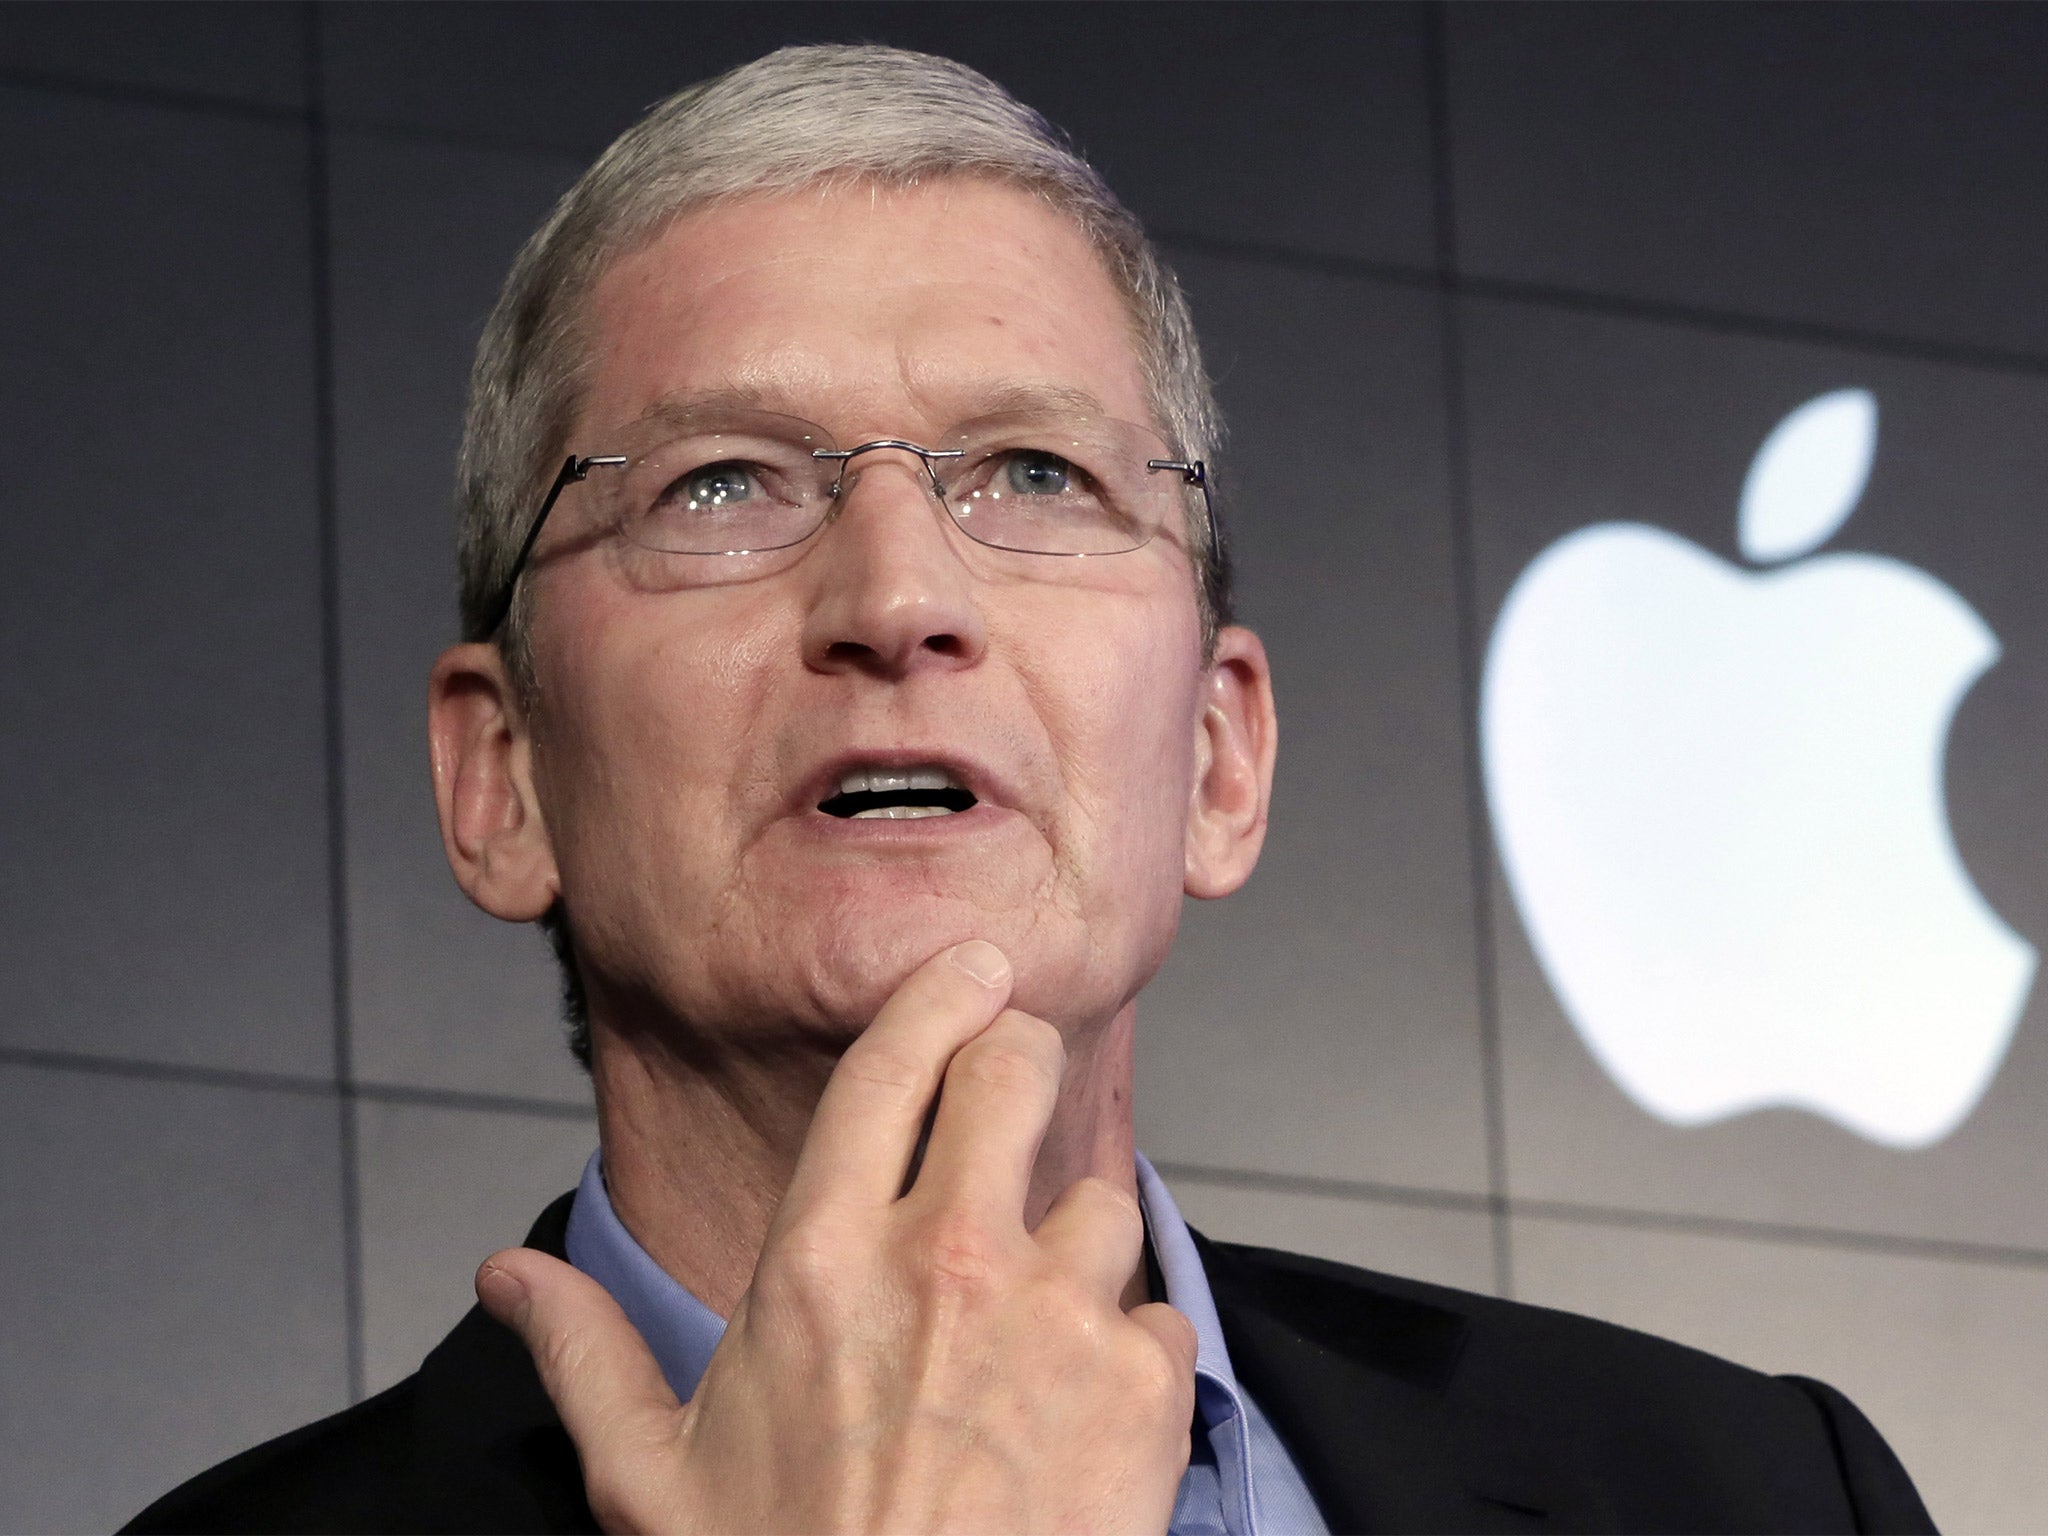 Apple CEO Tim Cook made clear the company has 'no sympathy for terrorists'